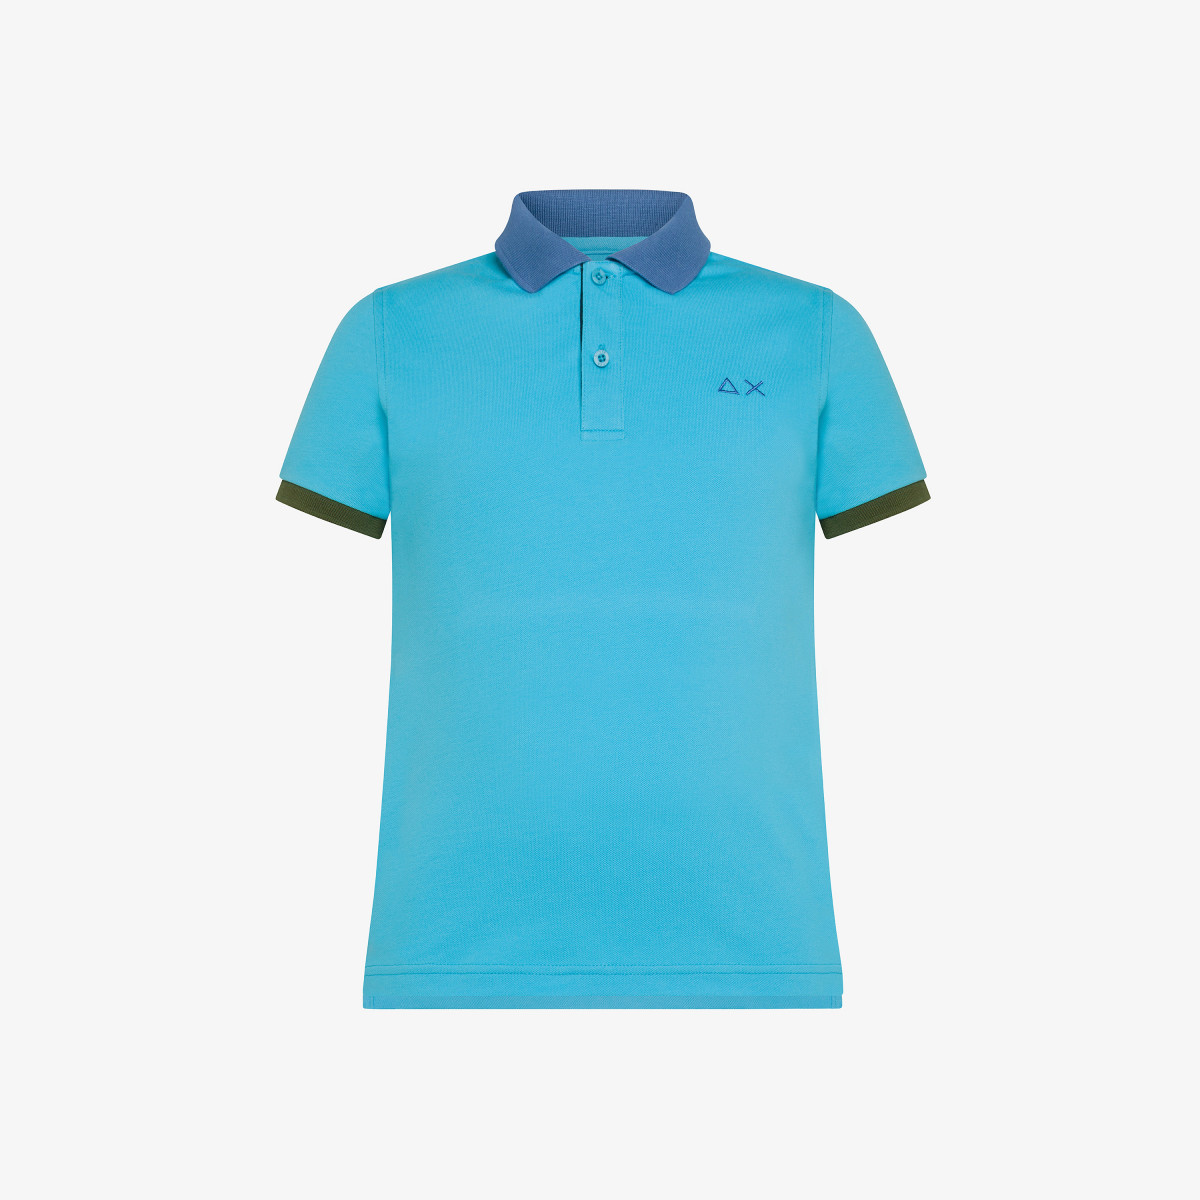 BOY'S POLO 3 COLOR WAY S/S TURQUOISE